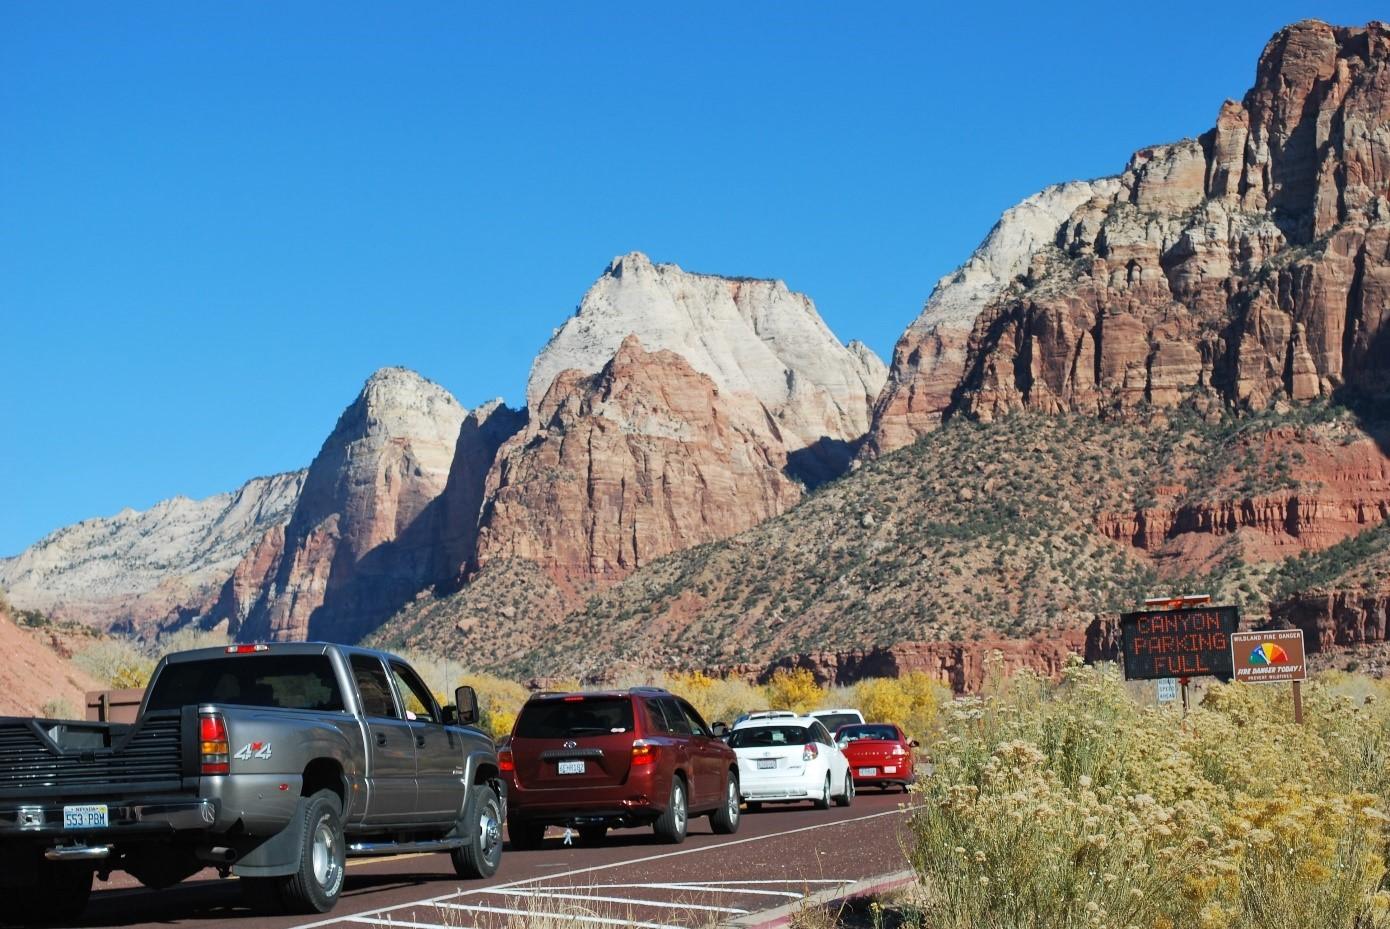 cars waiting in line on the road with sandstone cliffs in the background